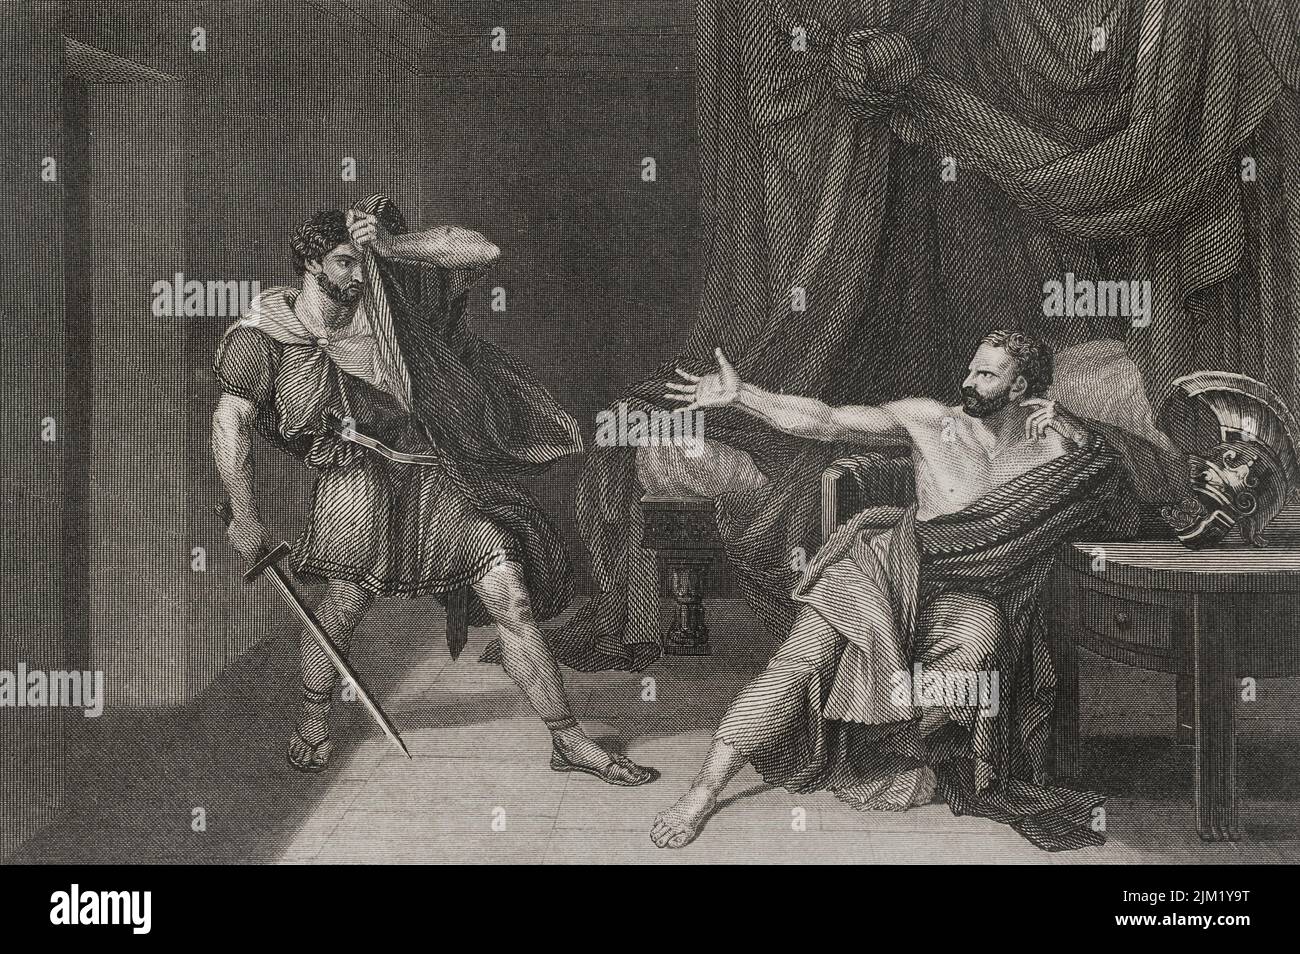 Gaius Marius (ca. 157 BC - 86 BC). Roman general and consul. Marius prisoner at Minturnae. It depicts the attempted execution of the consul Gaius Marius when he was captured in Minturnae. Engraving after a painting by Jean-Germain Drouais. "Historia Universal", by César Cantú. Volume II, 1854. Stock Photo